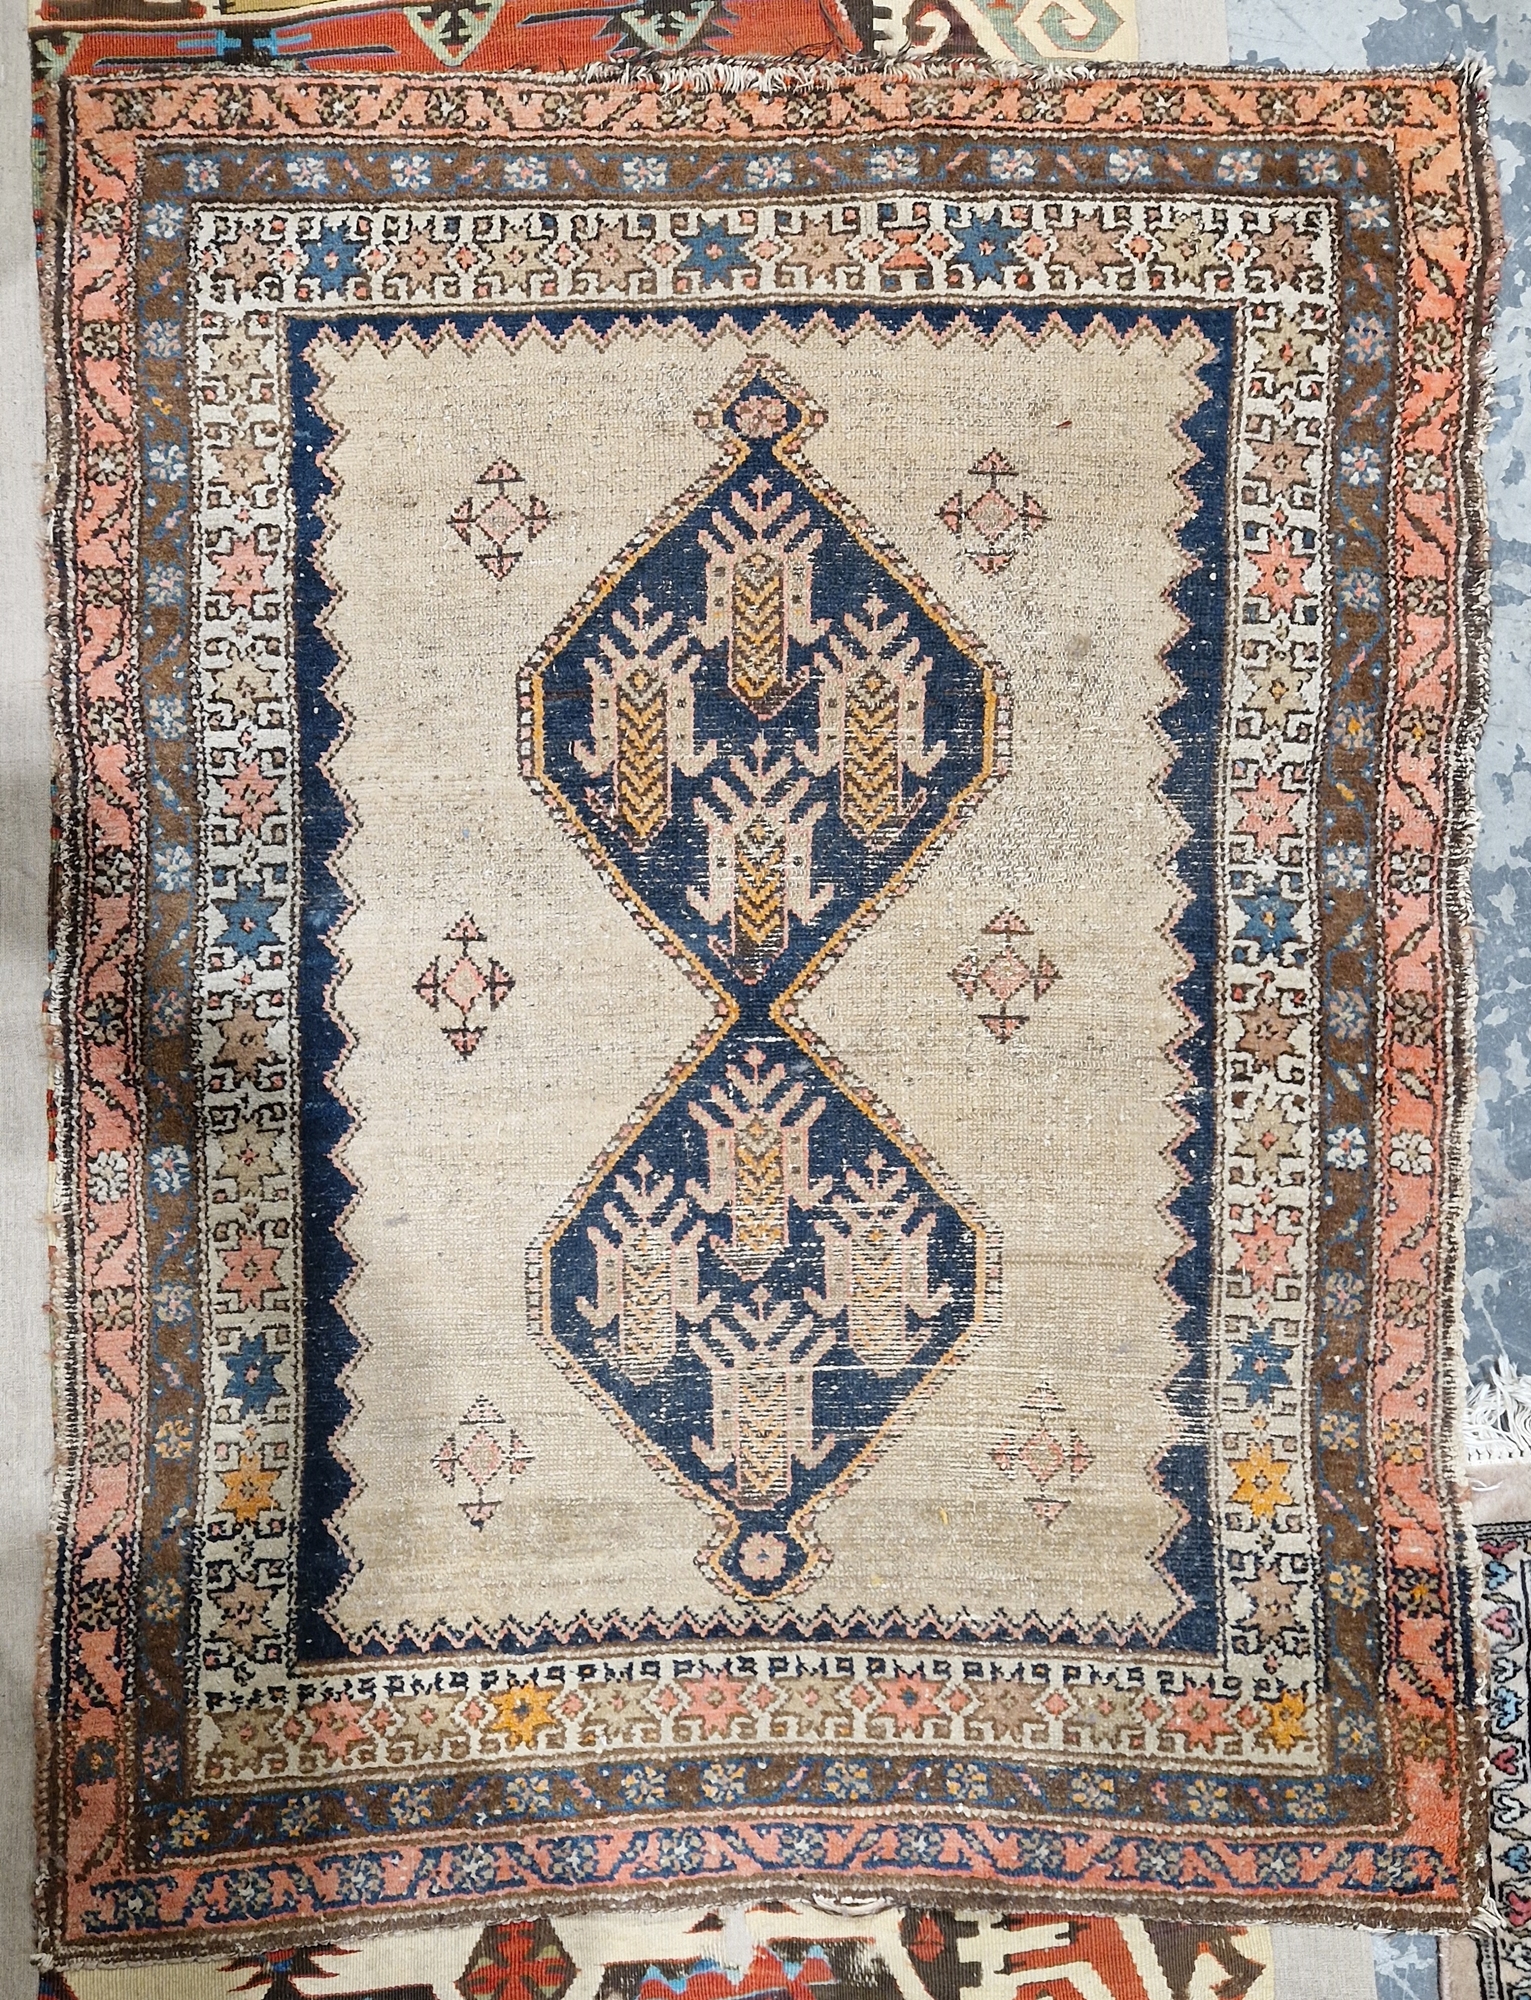 Eastern mushroom ground rug, central panel with joined lozenges to floral borders, 154cm x 110cm